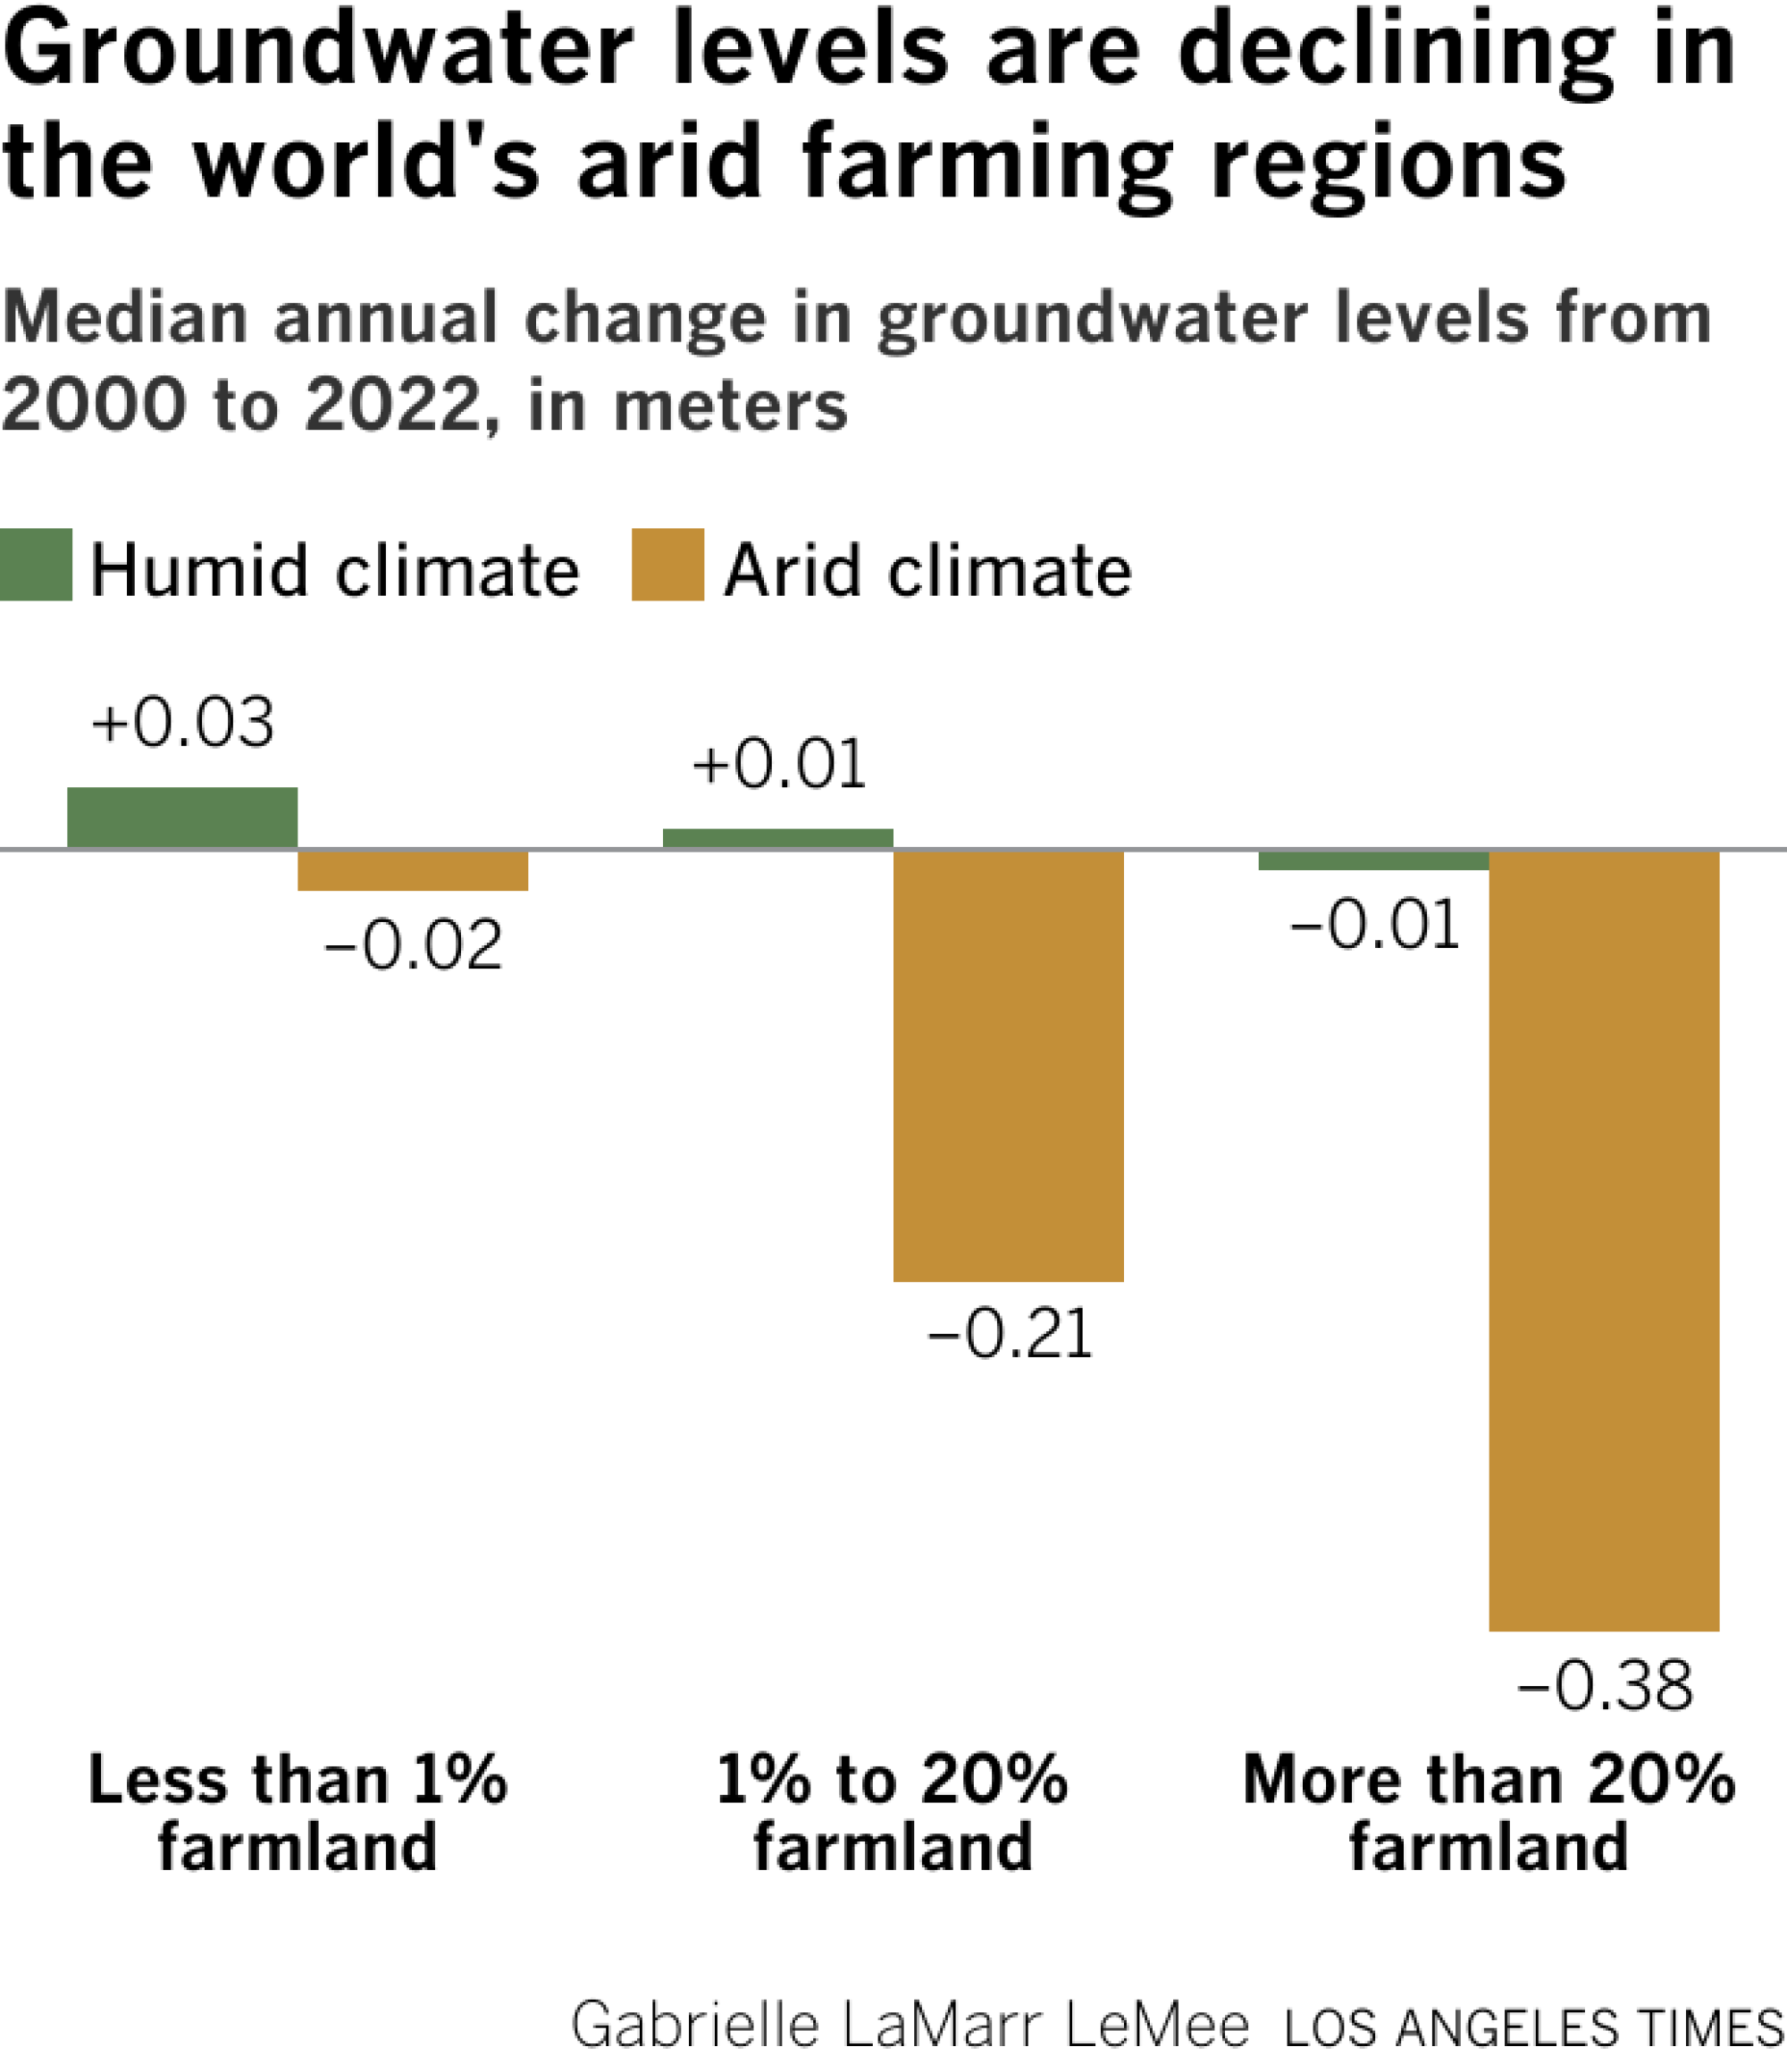 Groundwater levels are declining in the world's arid farming regions